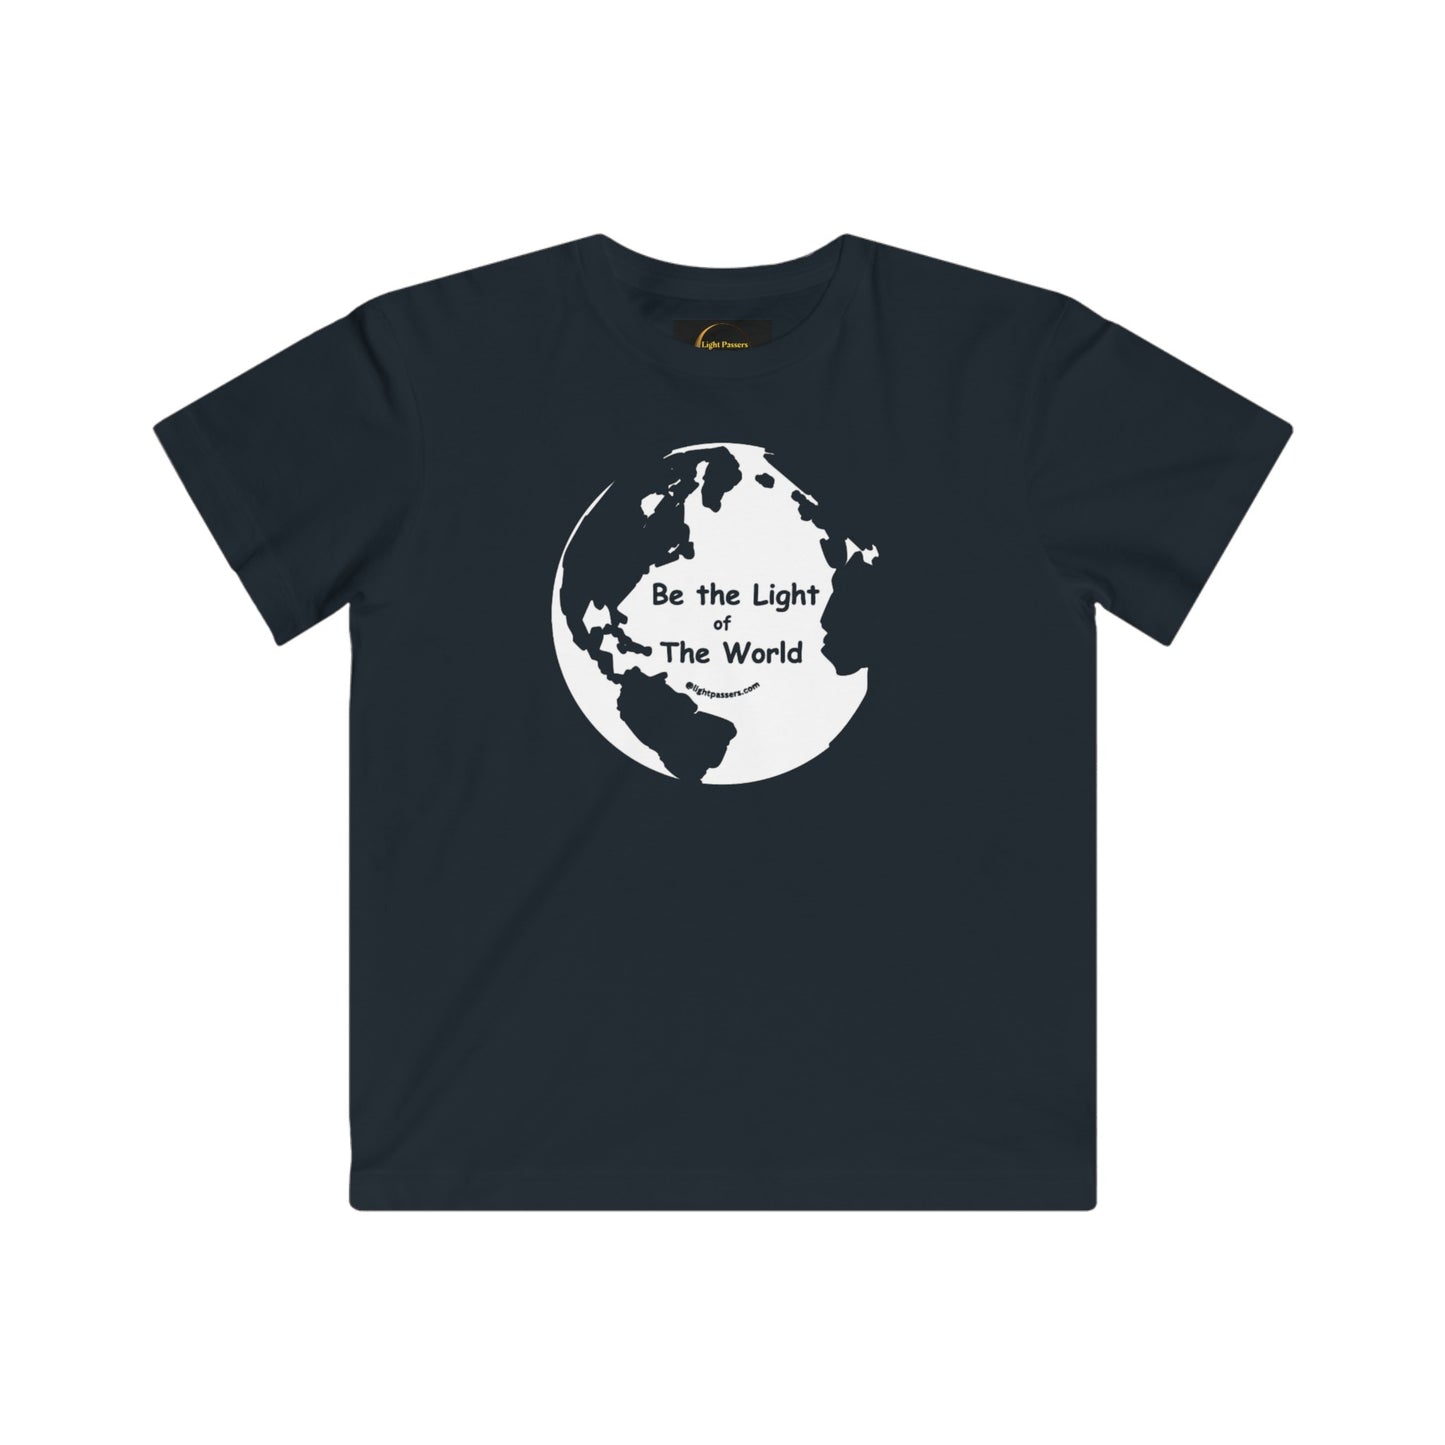 Youth black shirt with white design featuring a silhouette of a grenade and globe with text. Soft jersey fabric, 100% combed ringspun cotton, tear away label, regular fit. Be the Light of the World theme.